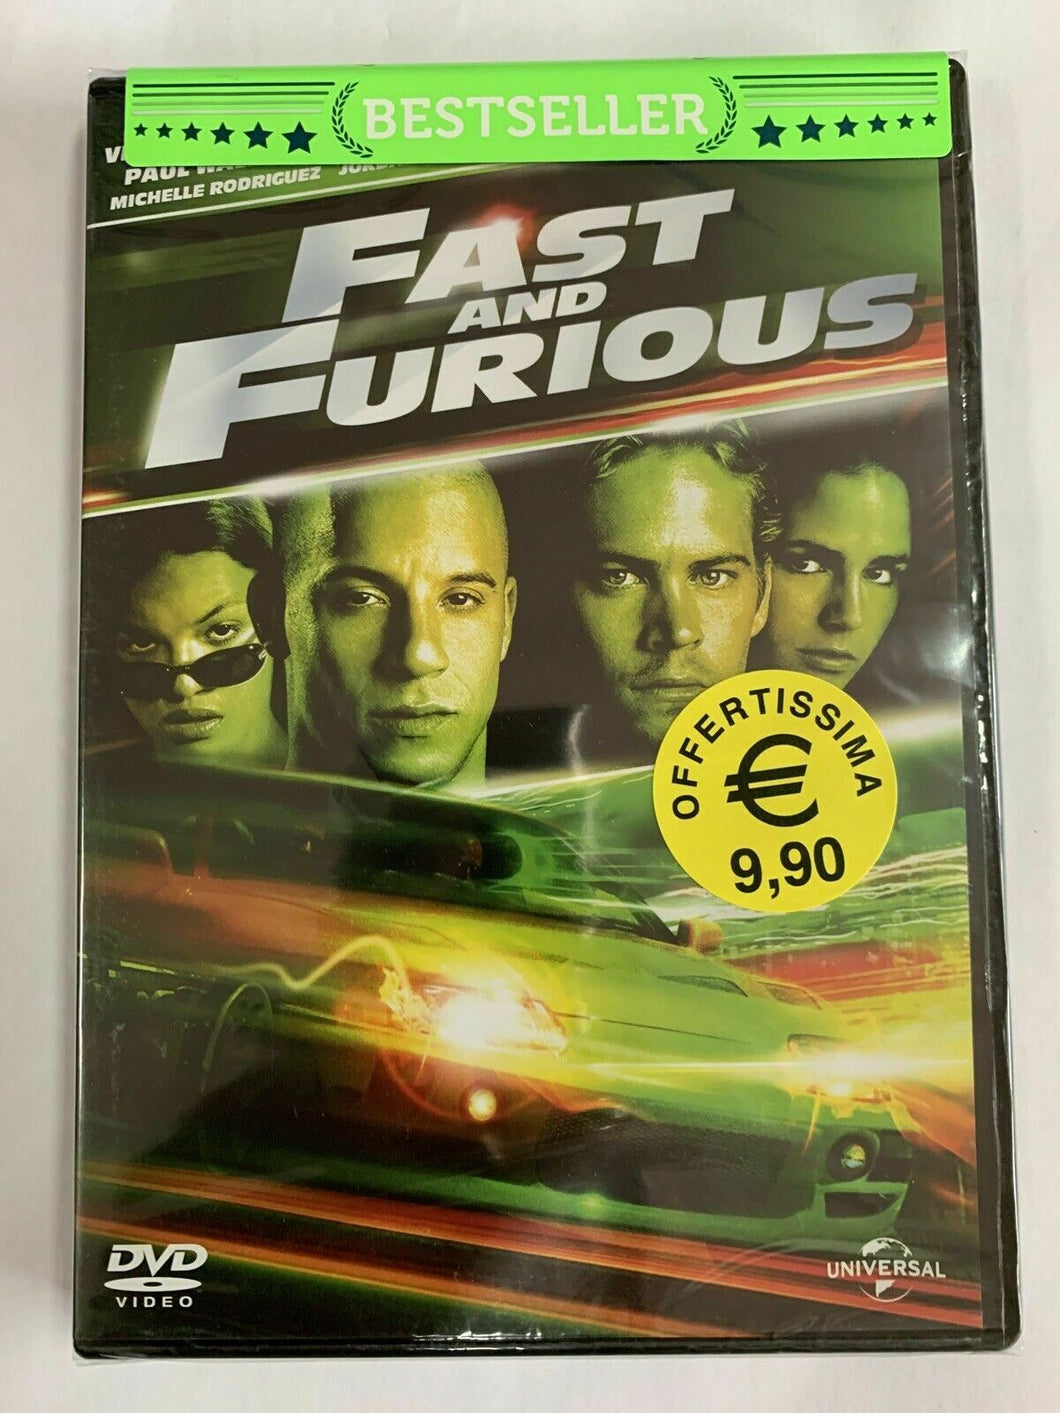 FAST AND FURIOUS (DVD) ITALIANO, NUOVO